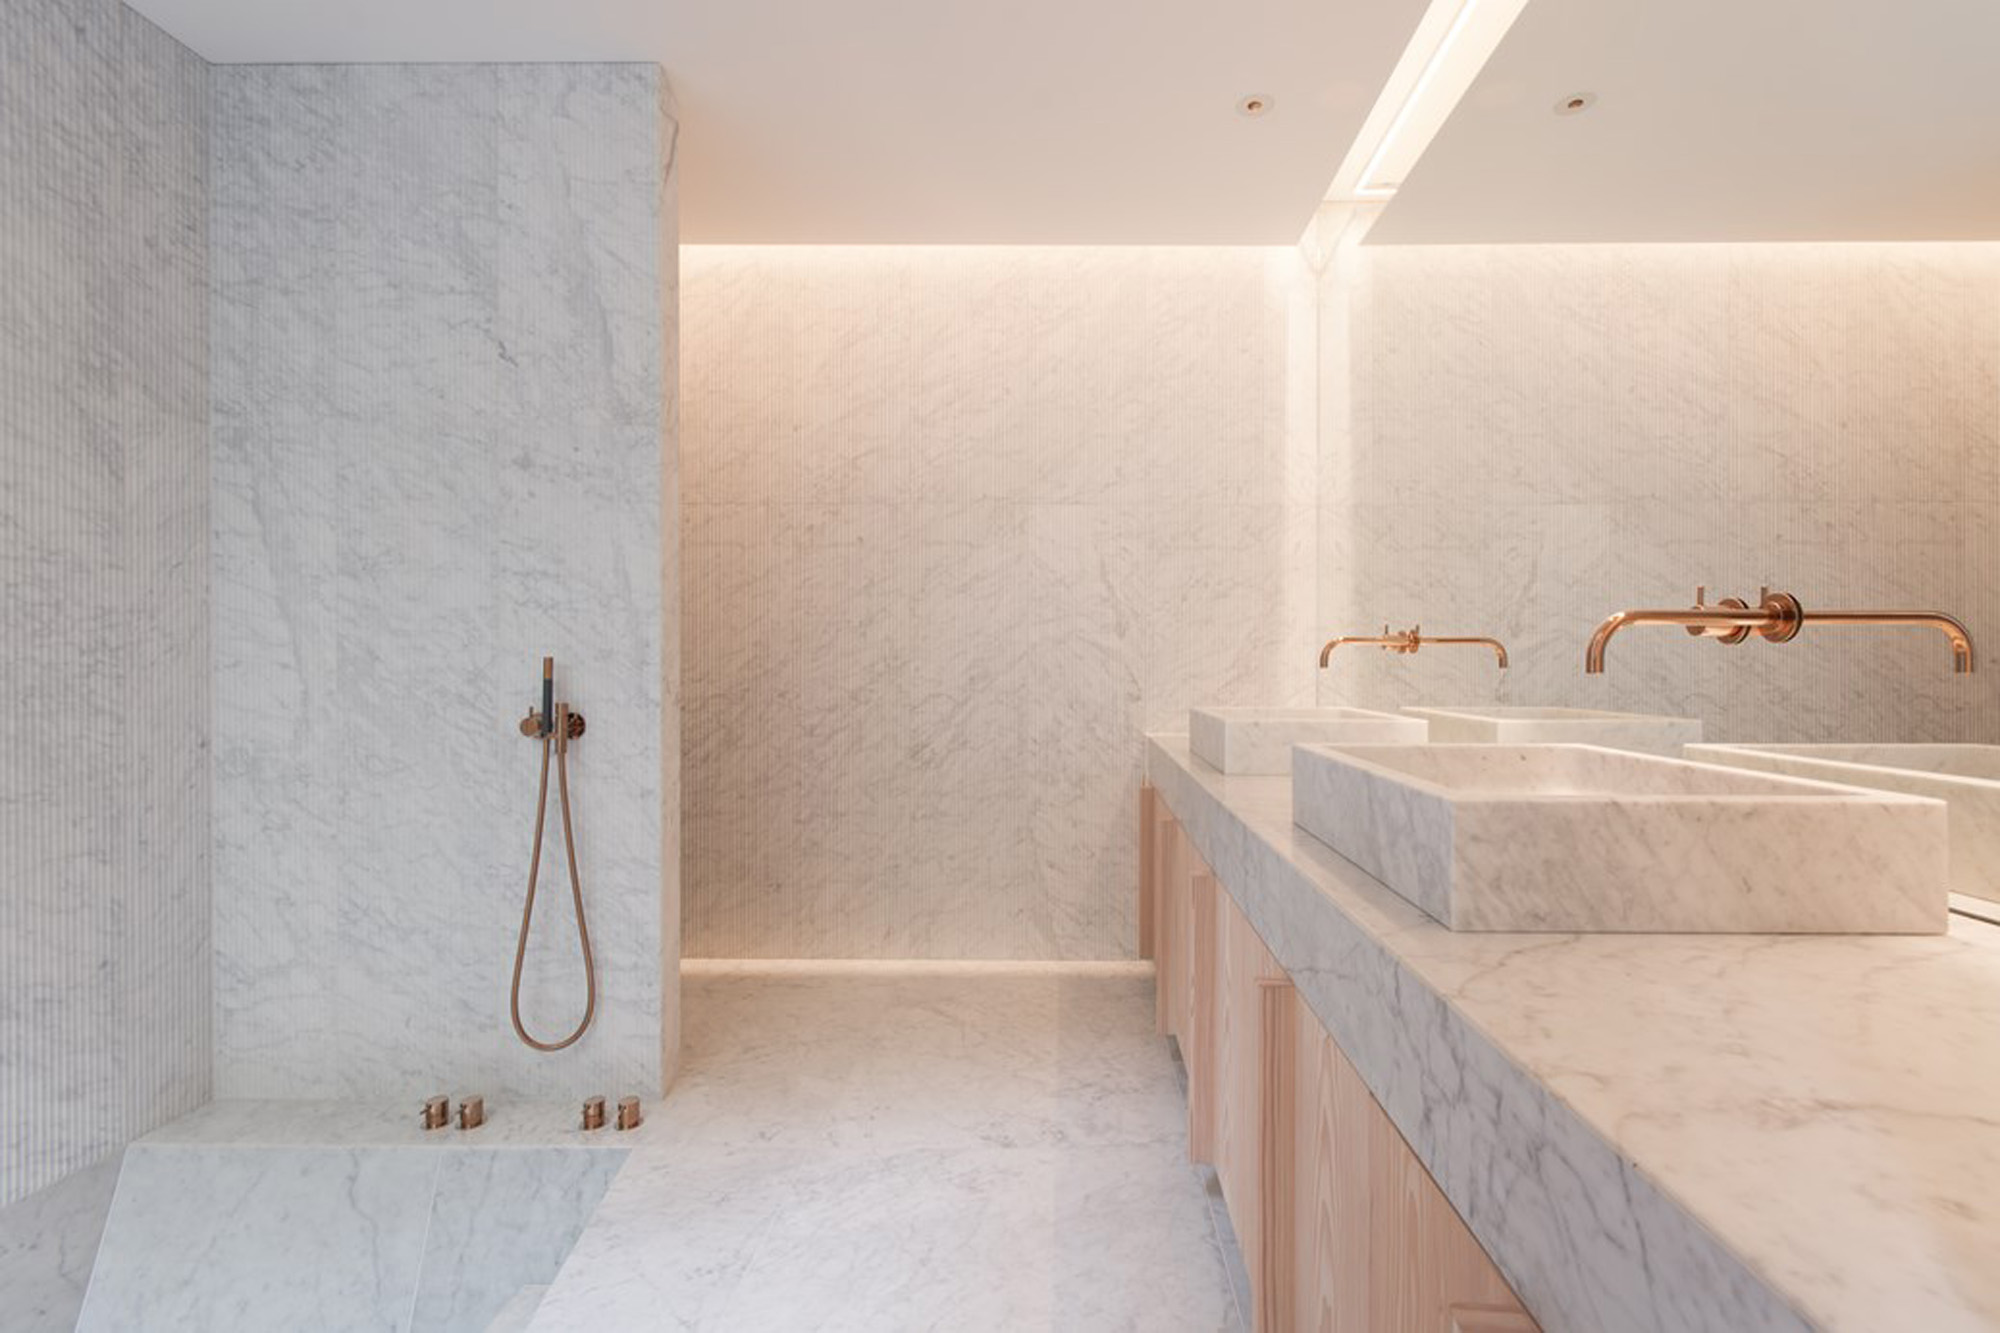 Bathroom by Gianni Botsford - luxury architecture in London